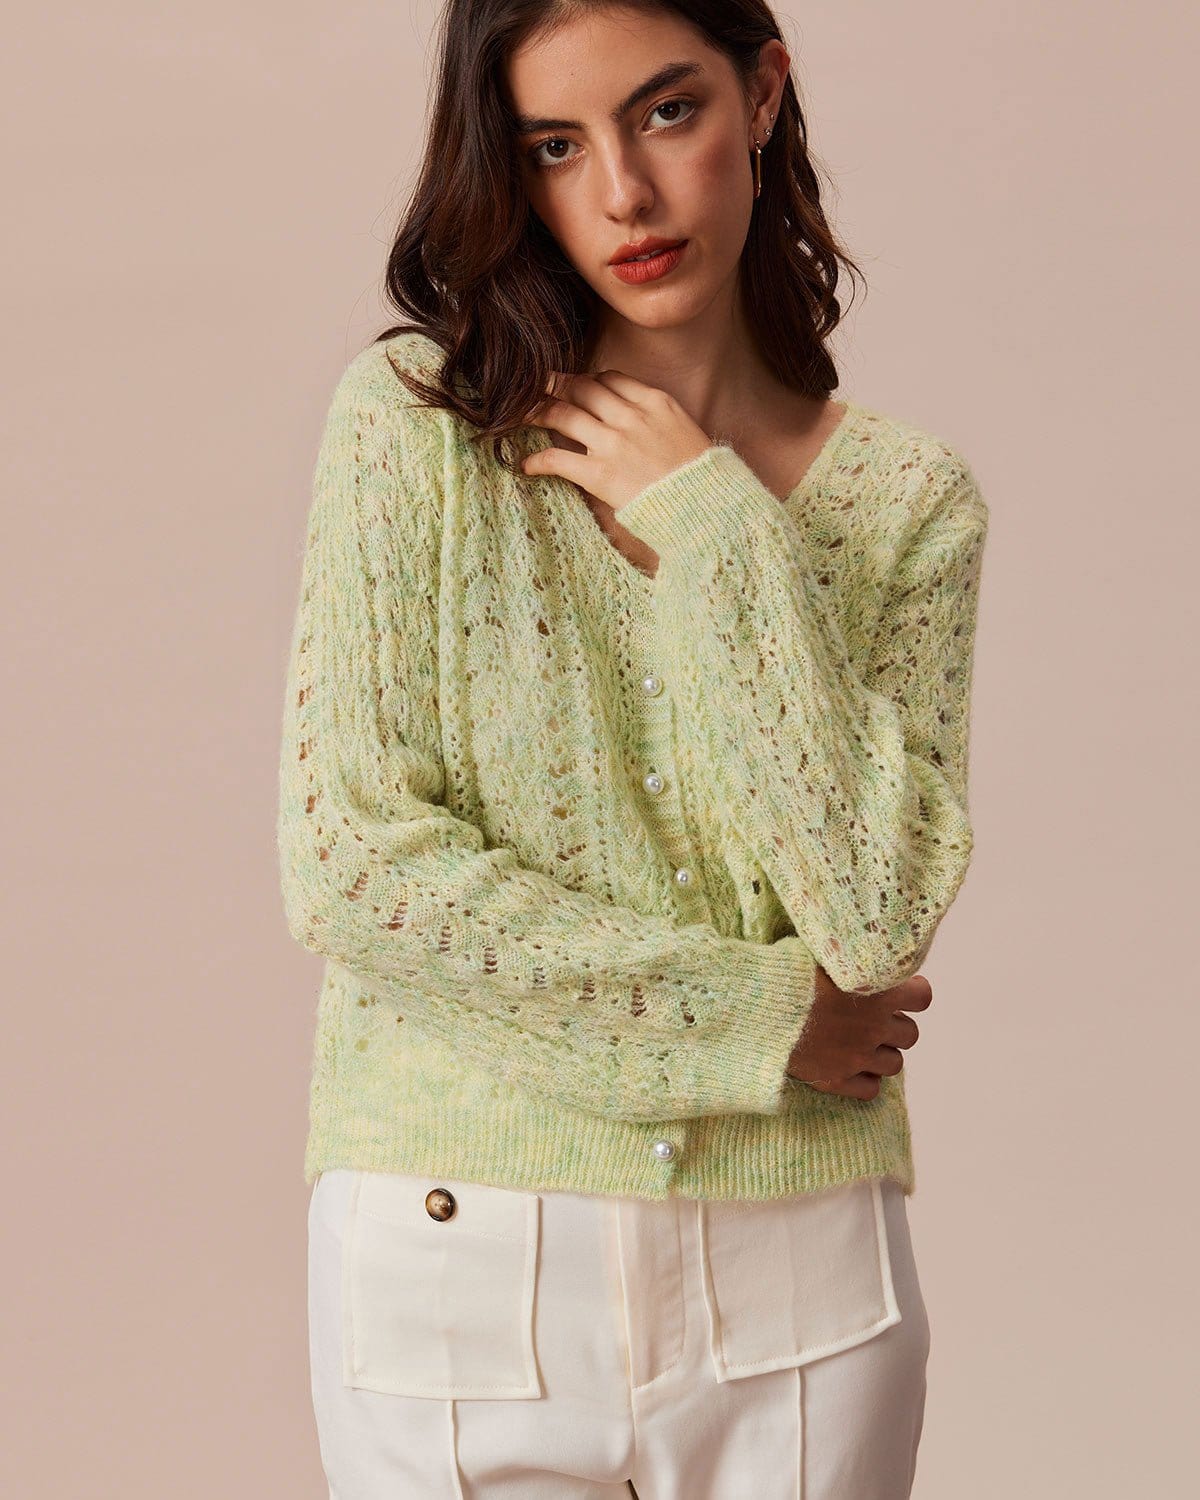 The Solid Round Neck Pointelle Cardigan - Long Sleeve, Button